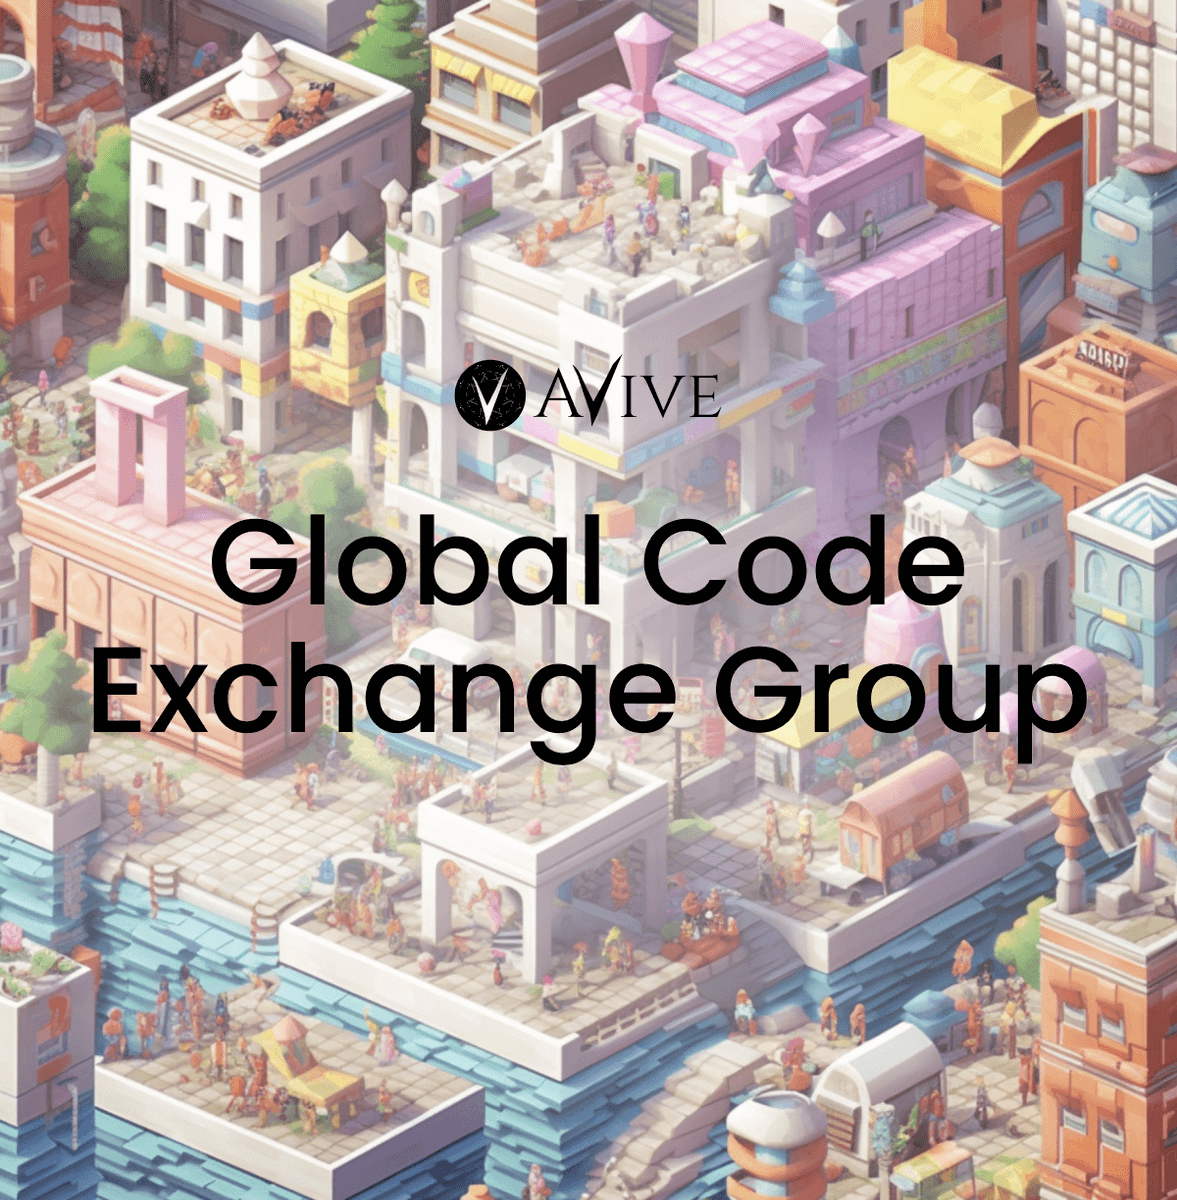 🧐Looking to exchange codes? 

👉Join the code exchange group at t.me/AviveGlobal_Co… 

and connect with fellow #AviveCitizens 

 Let's share the excitement together!